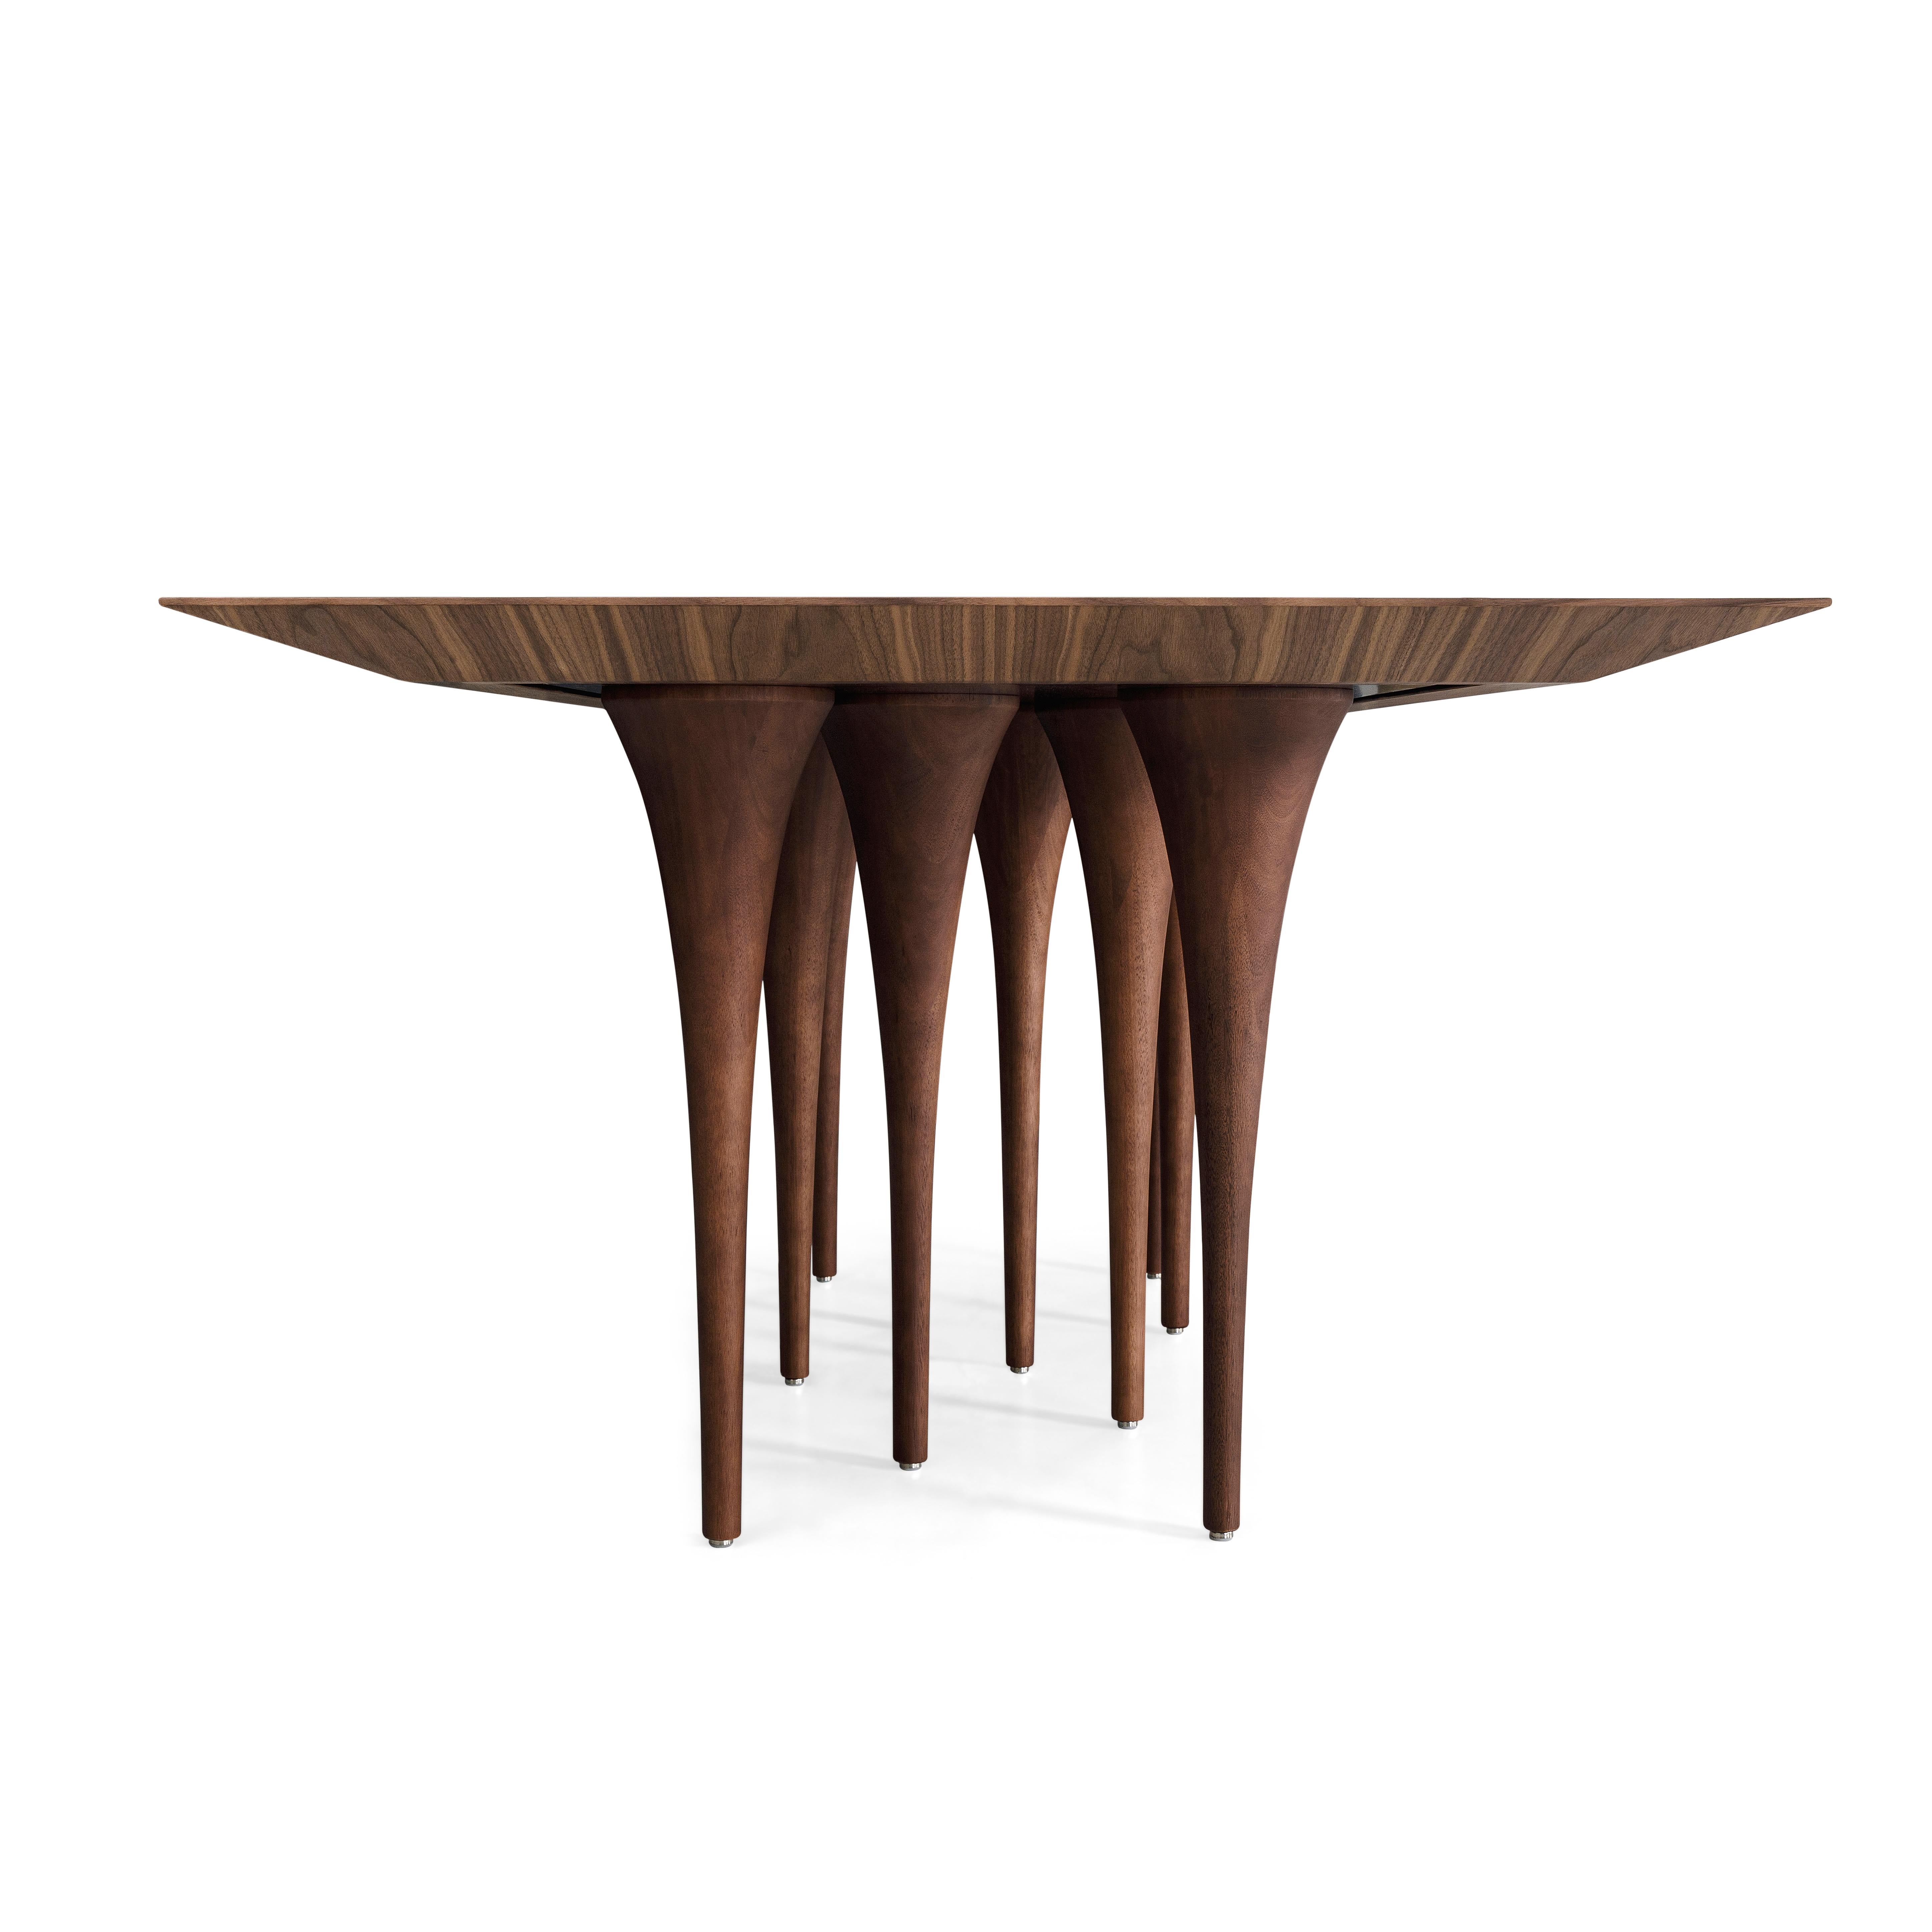 Contemporary Pin Dining Table with a Walnut Wood Veneered Table Top and 10 Legs 71'' For Sale